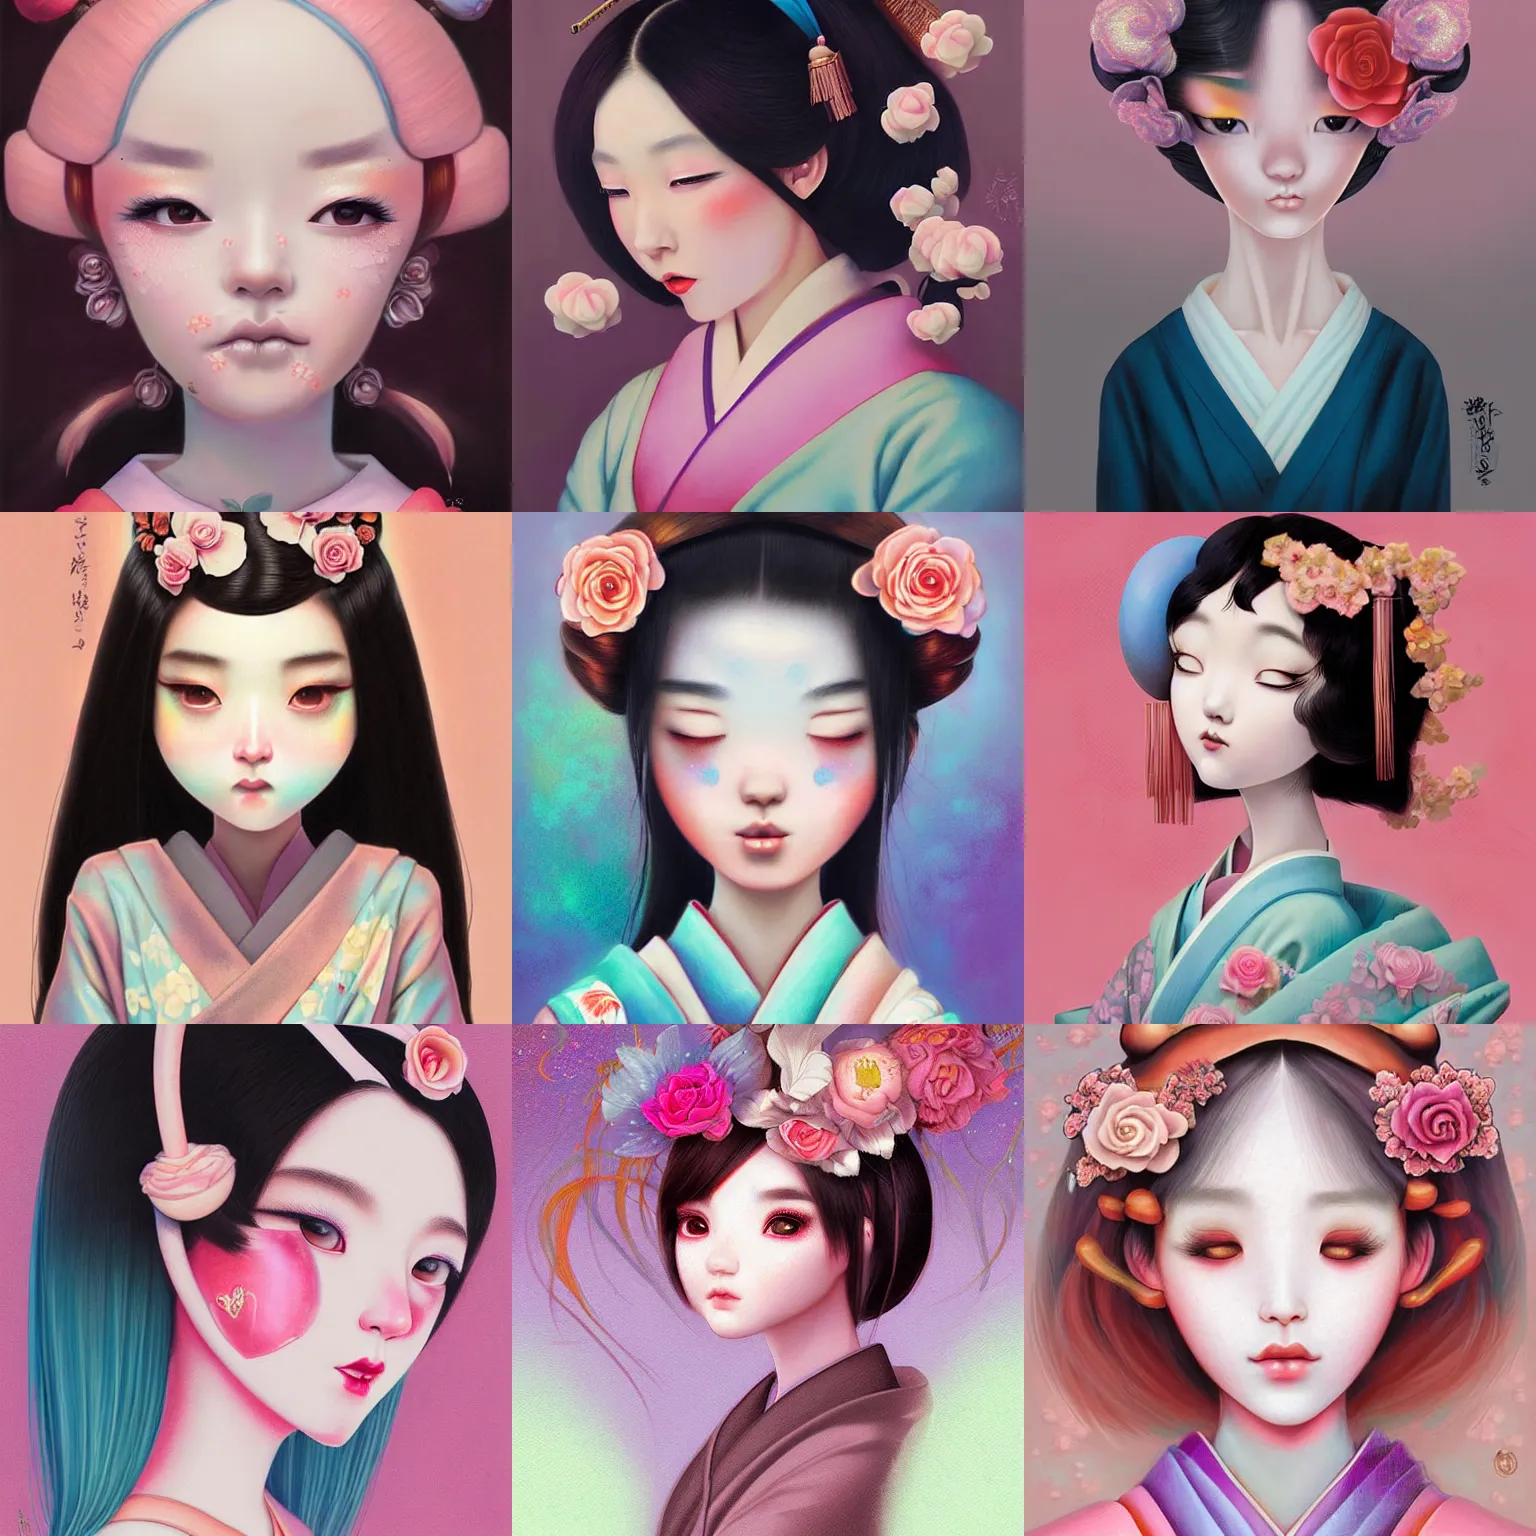 Prompt: a digital painting of a geisha e - girl by amy sol hikari shimoda, mark ryden, cute, weird, cool, pastel colors, rose gold, synthwave colors, face symmetry, artgerm